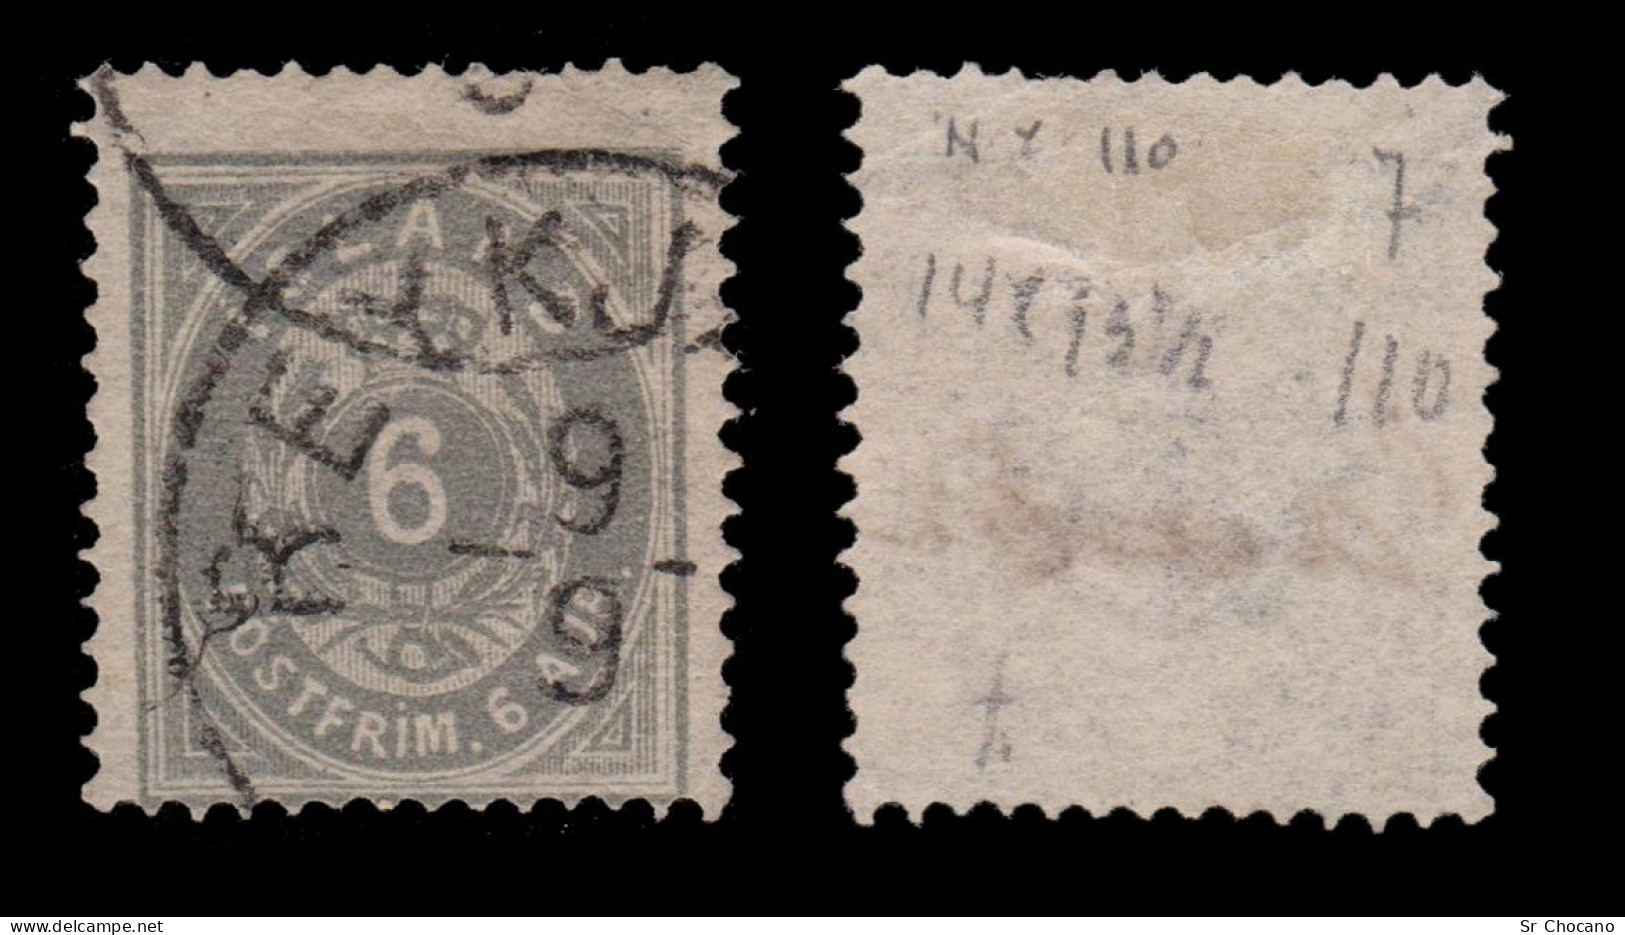 ICELAND STAMP.1876.6a.Scott.10.USED.Perf.14x13 ½ - Oblitérés